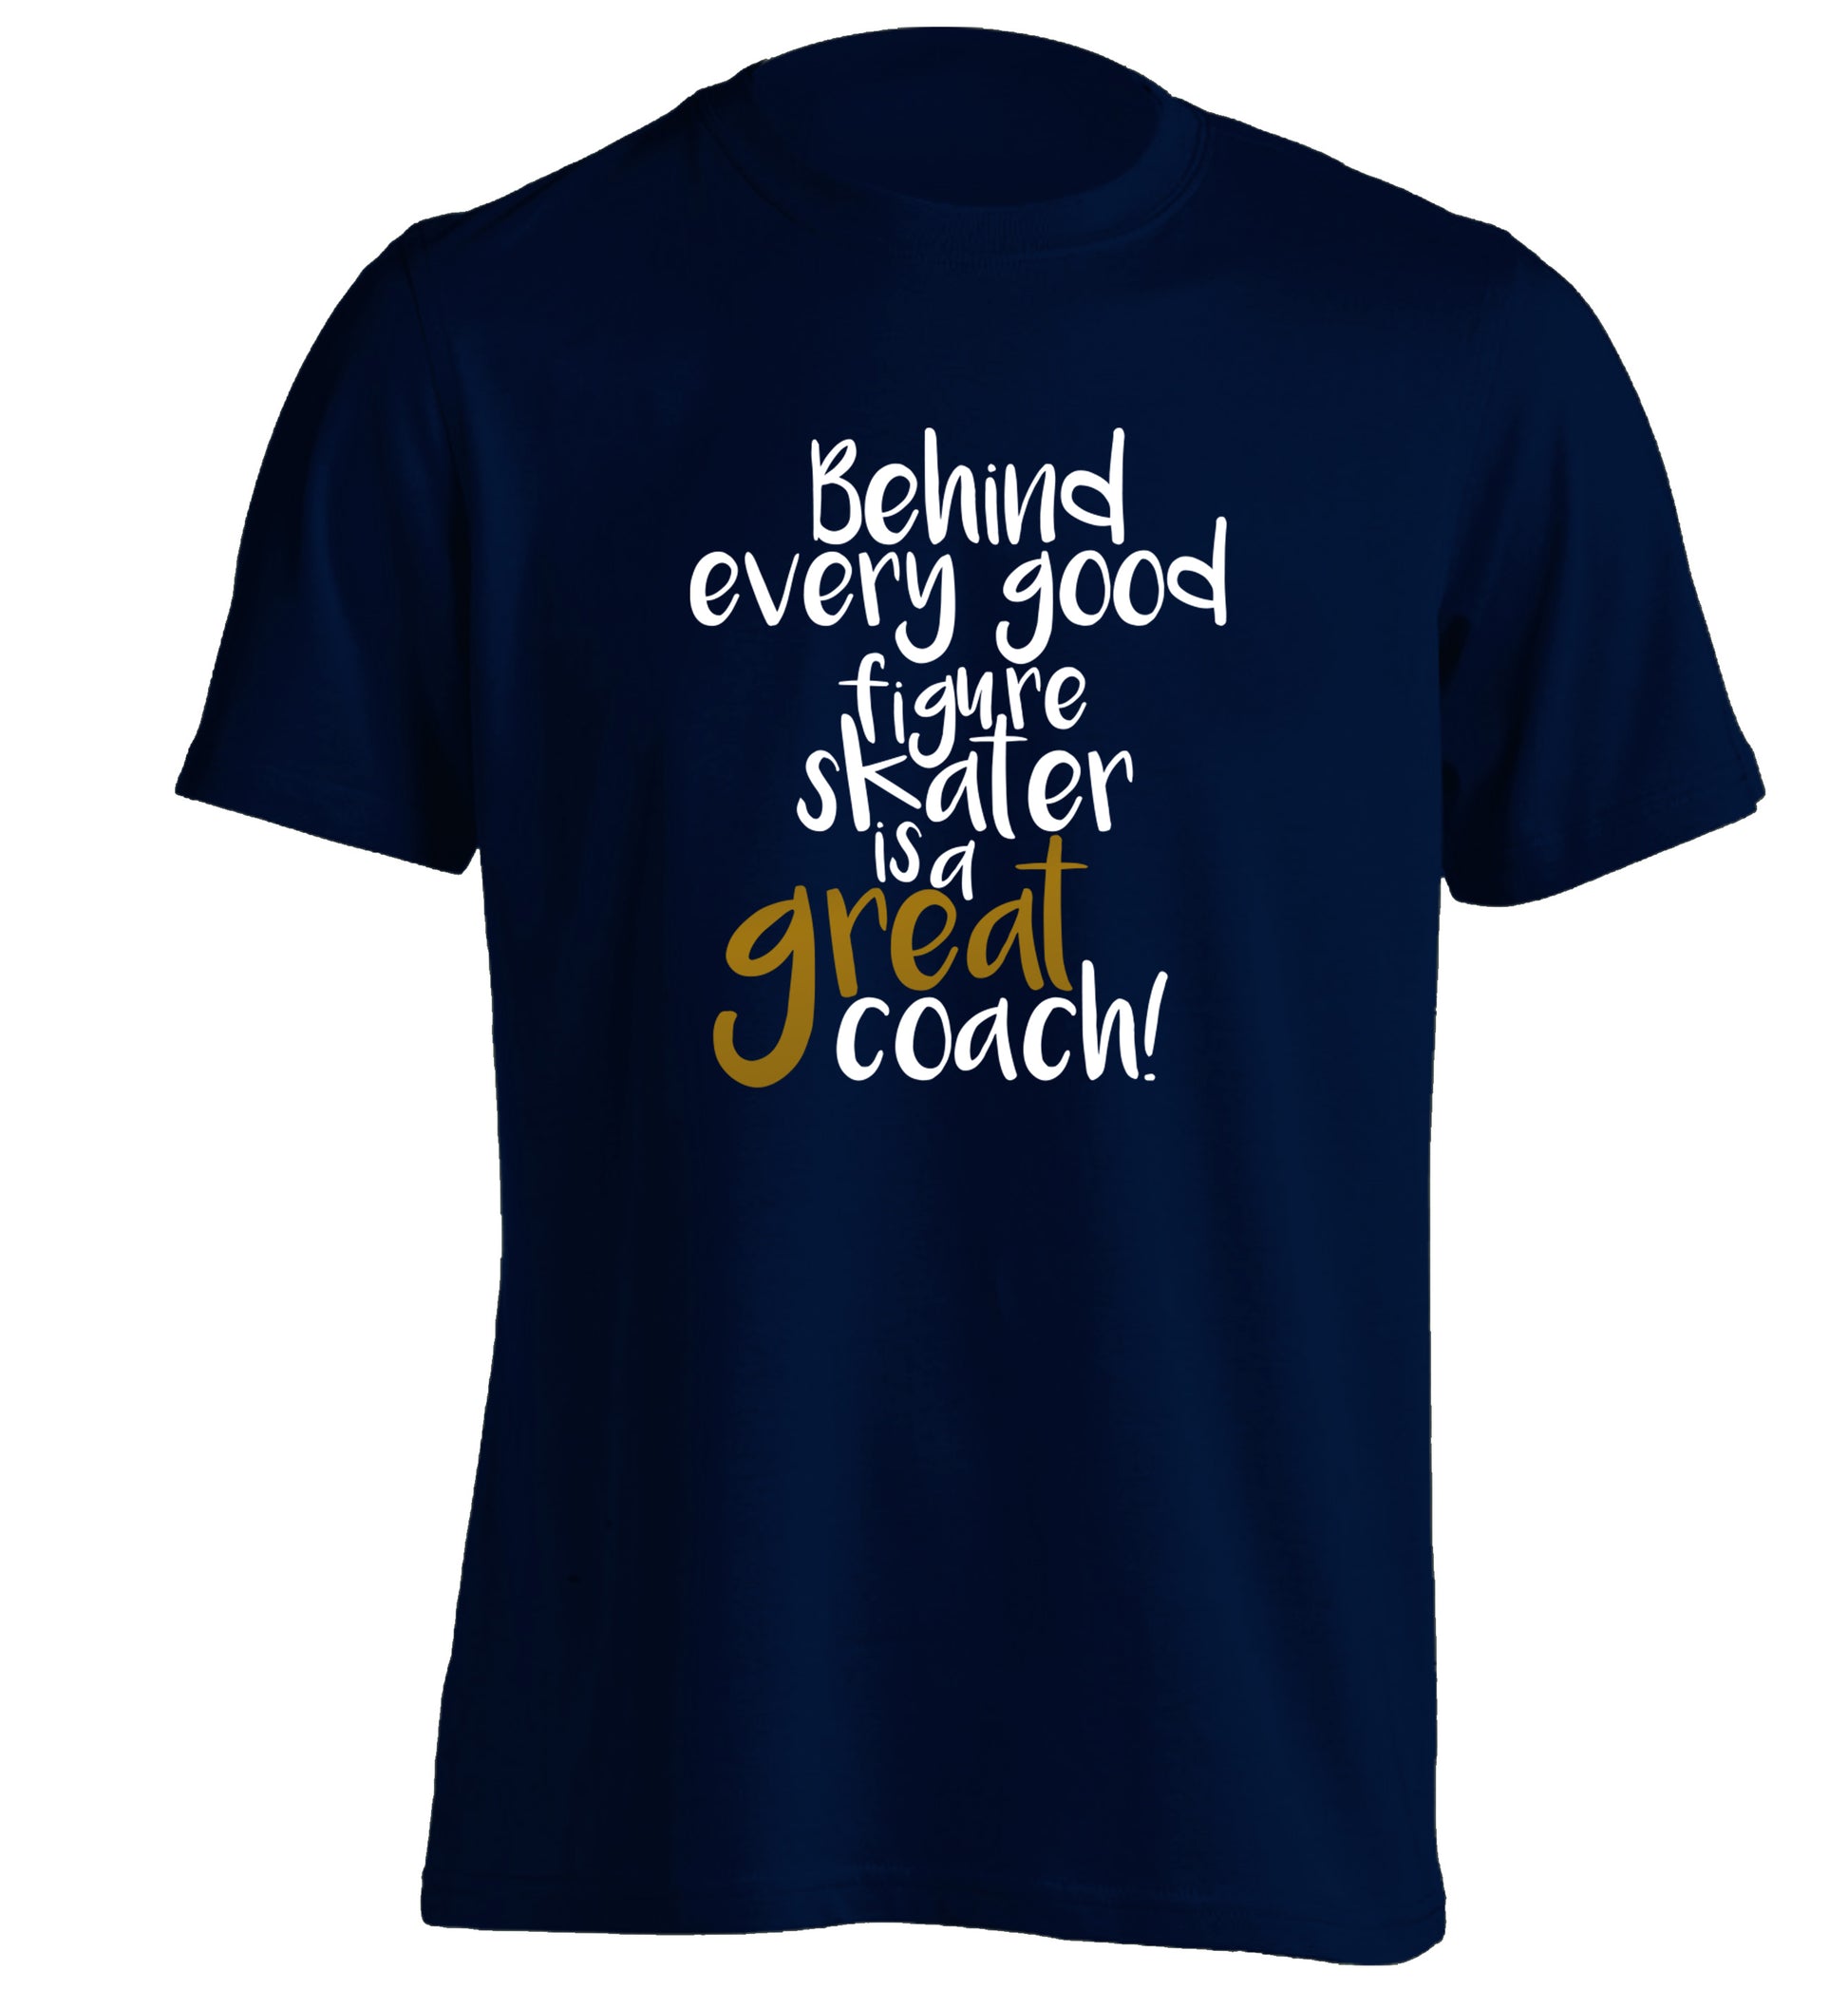 Behind every good figure skater is a great coach adults unisexnavy Tshirt 2XL